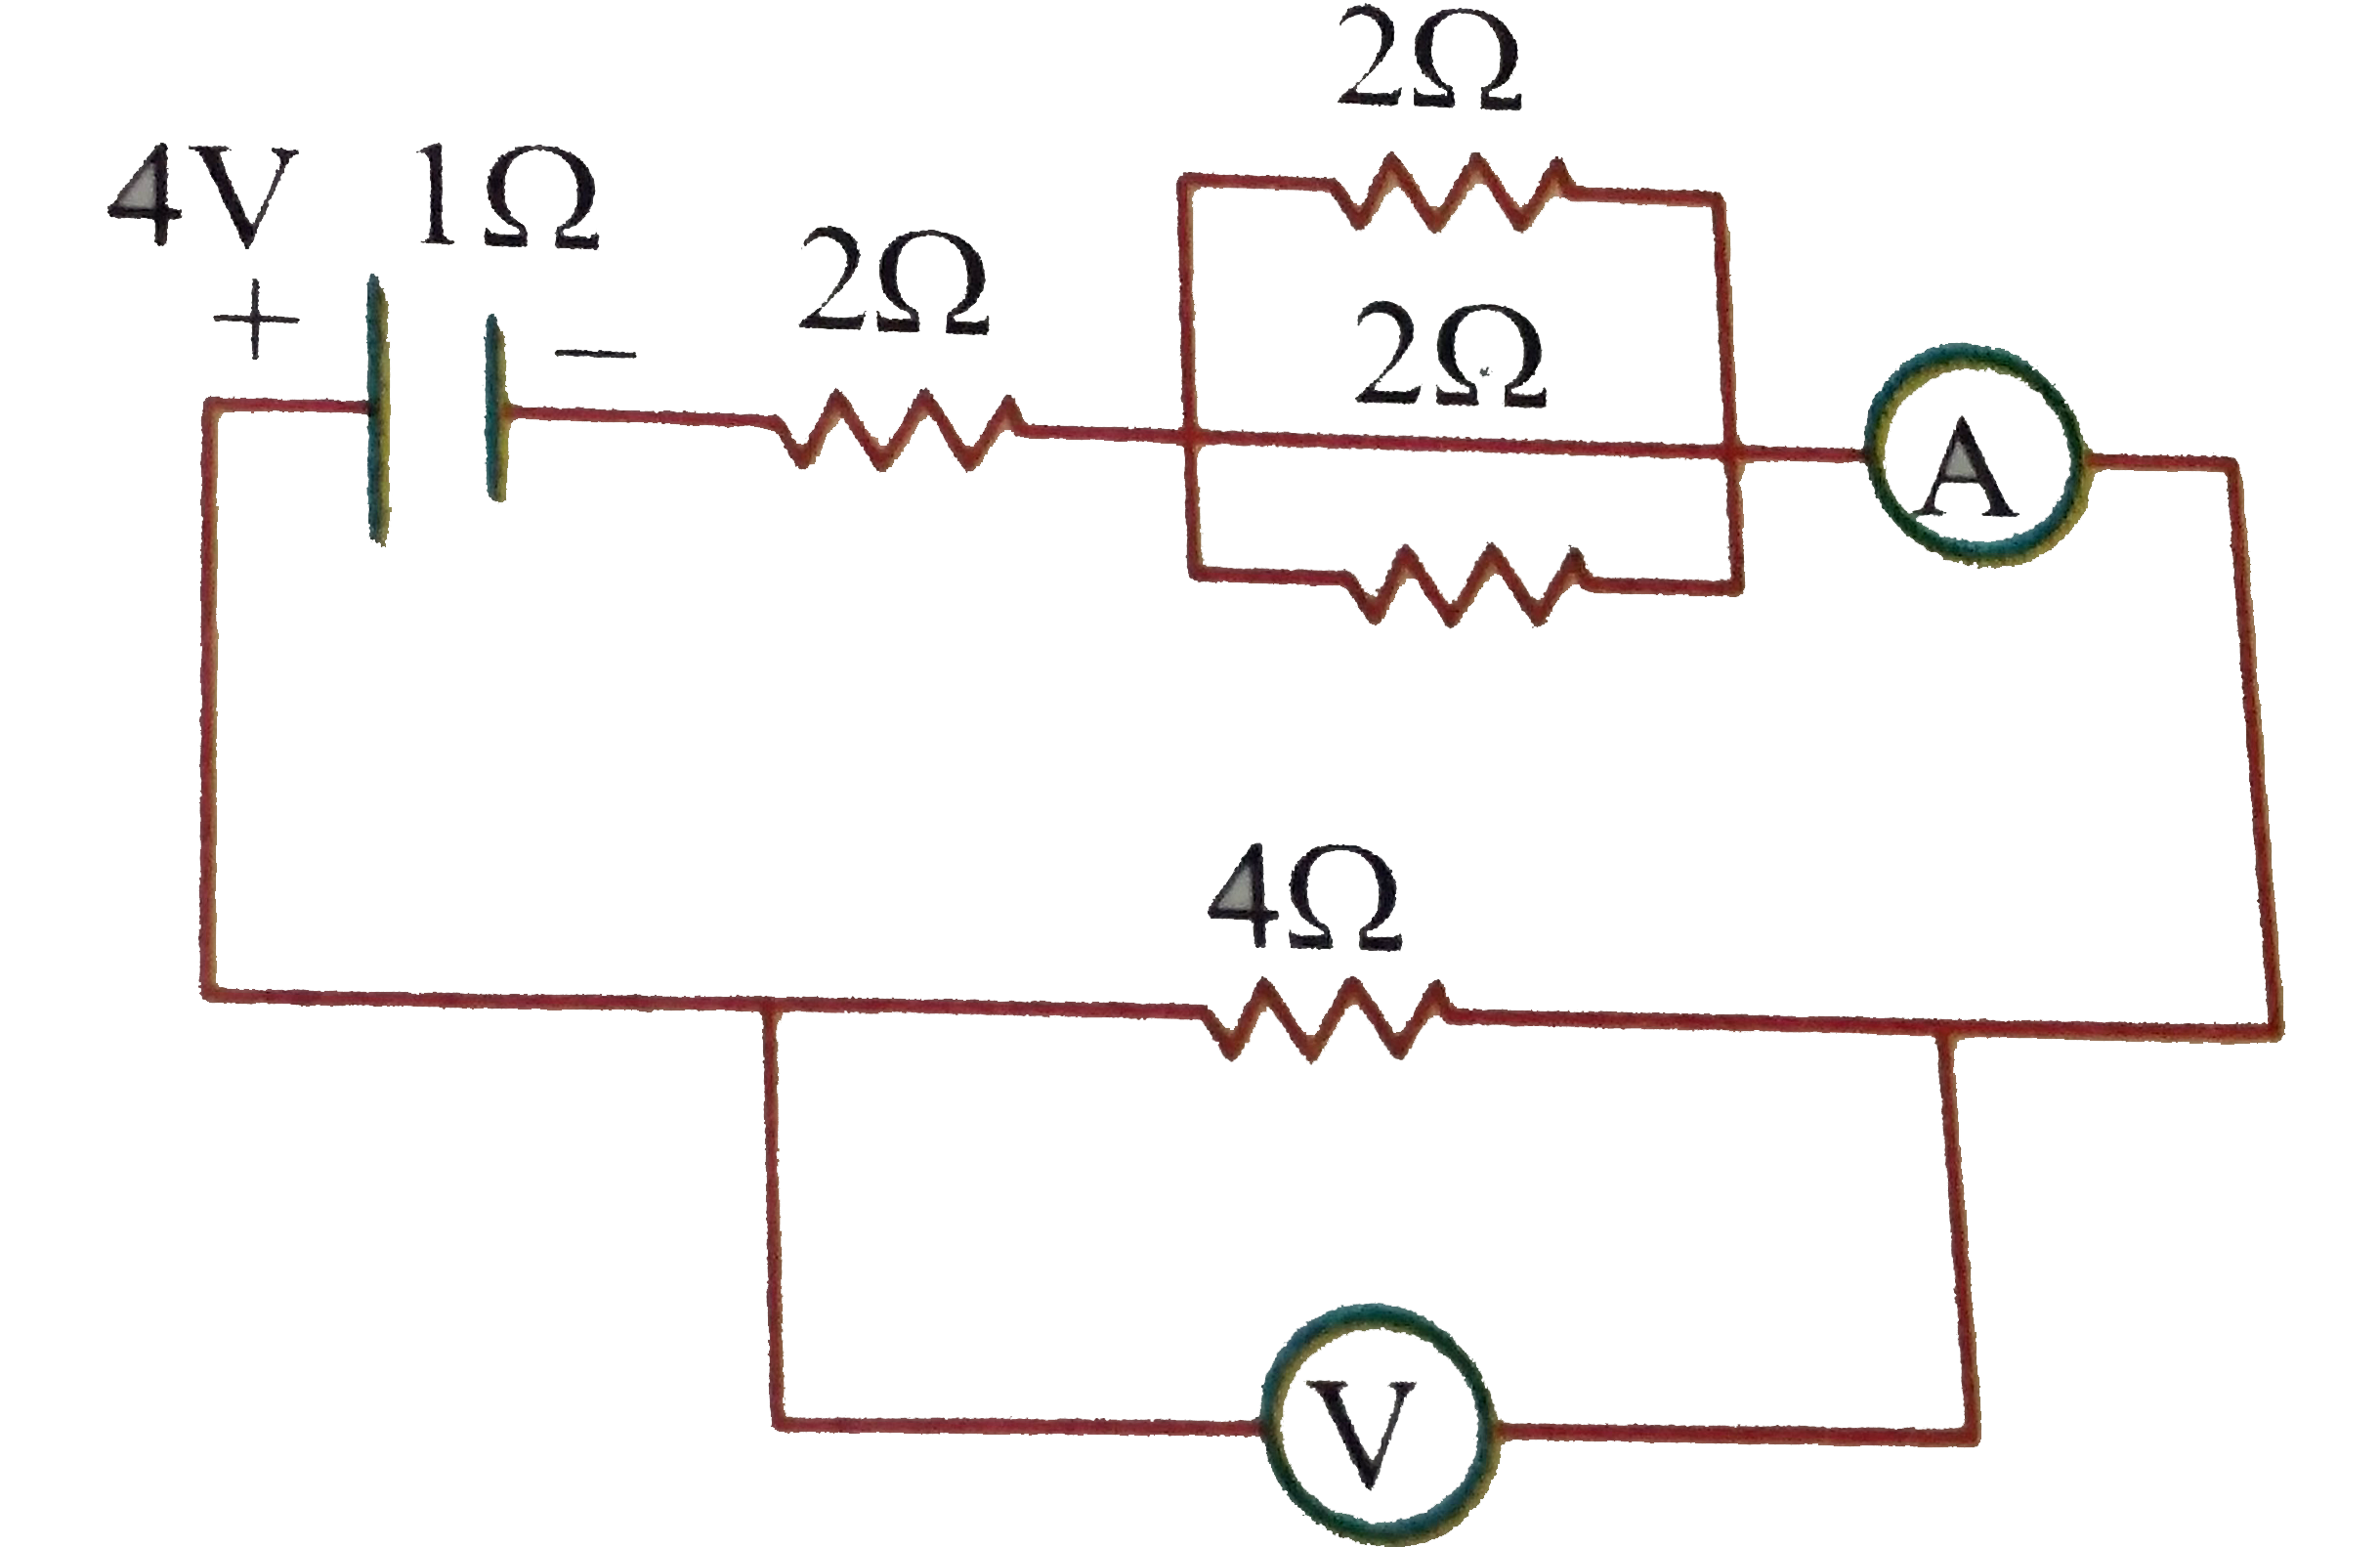 What is the equivalent resistance of the circuit